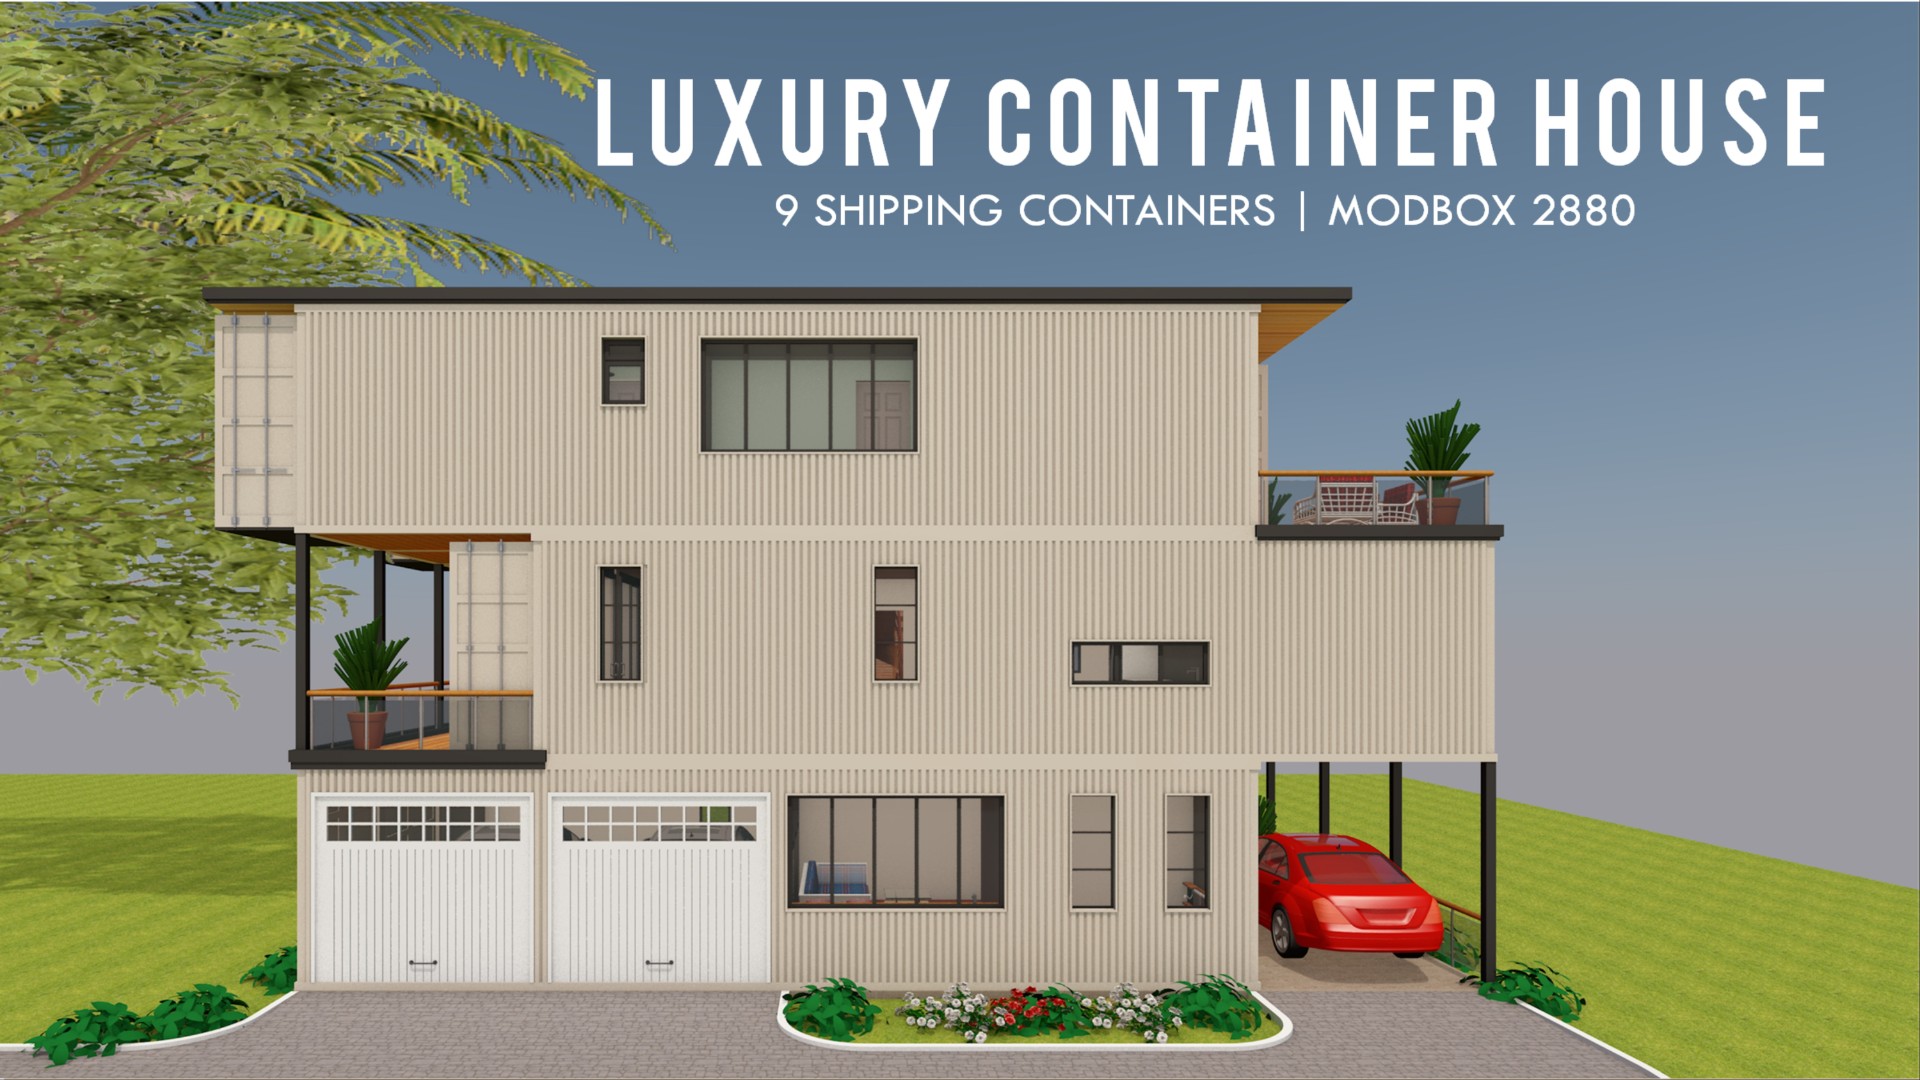 Luxury Shipping Container House Design + Floor Plans